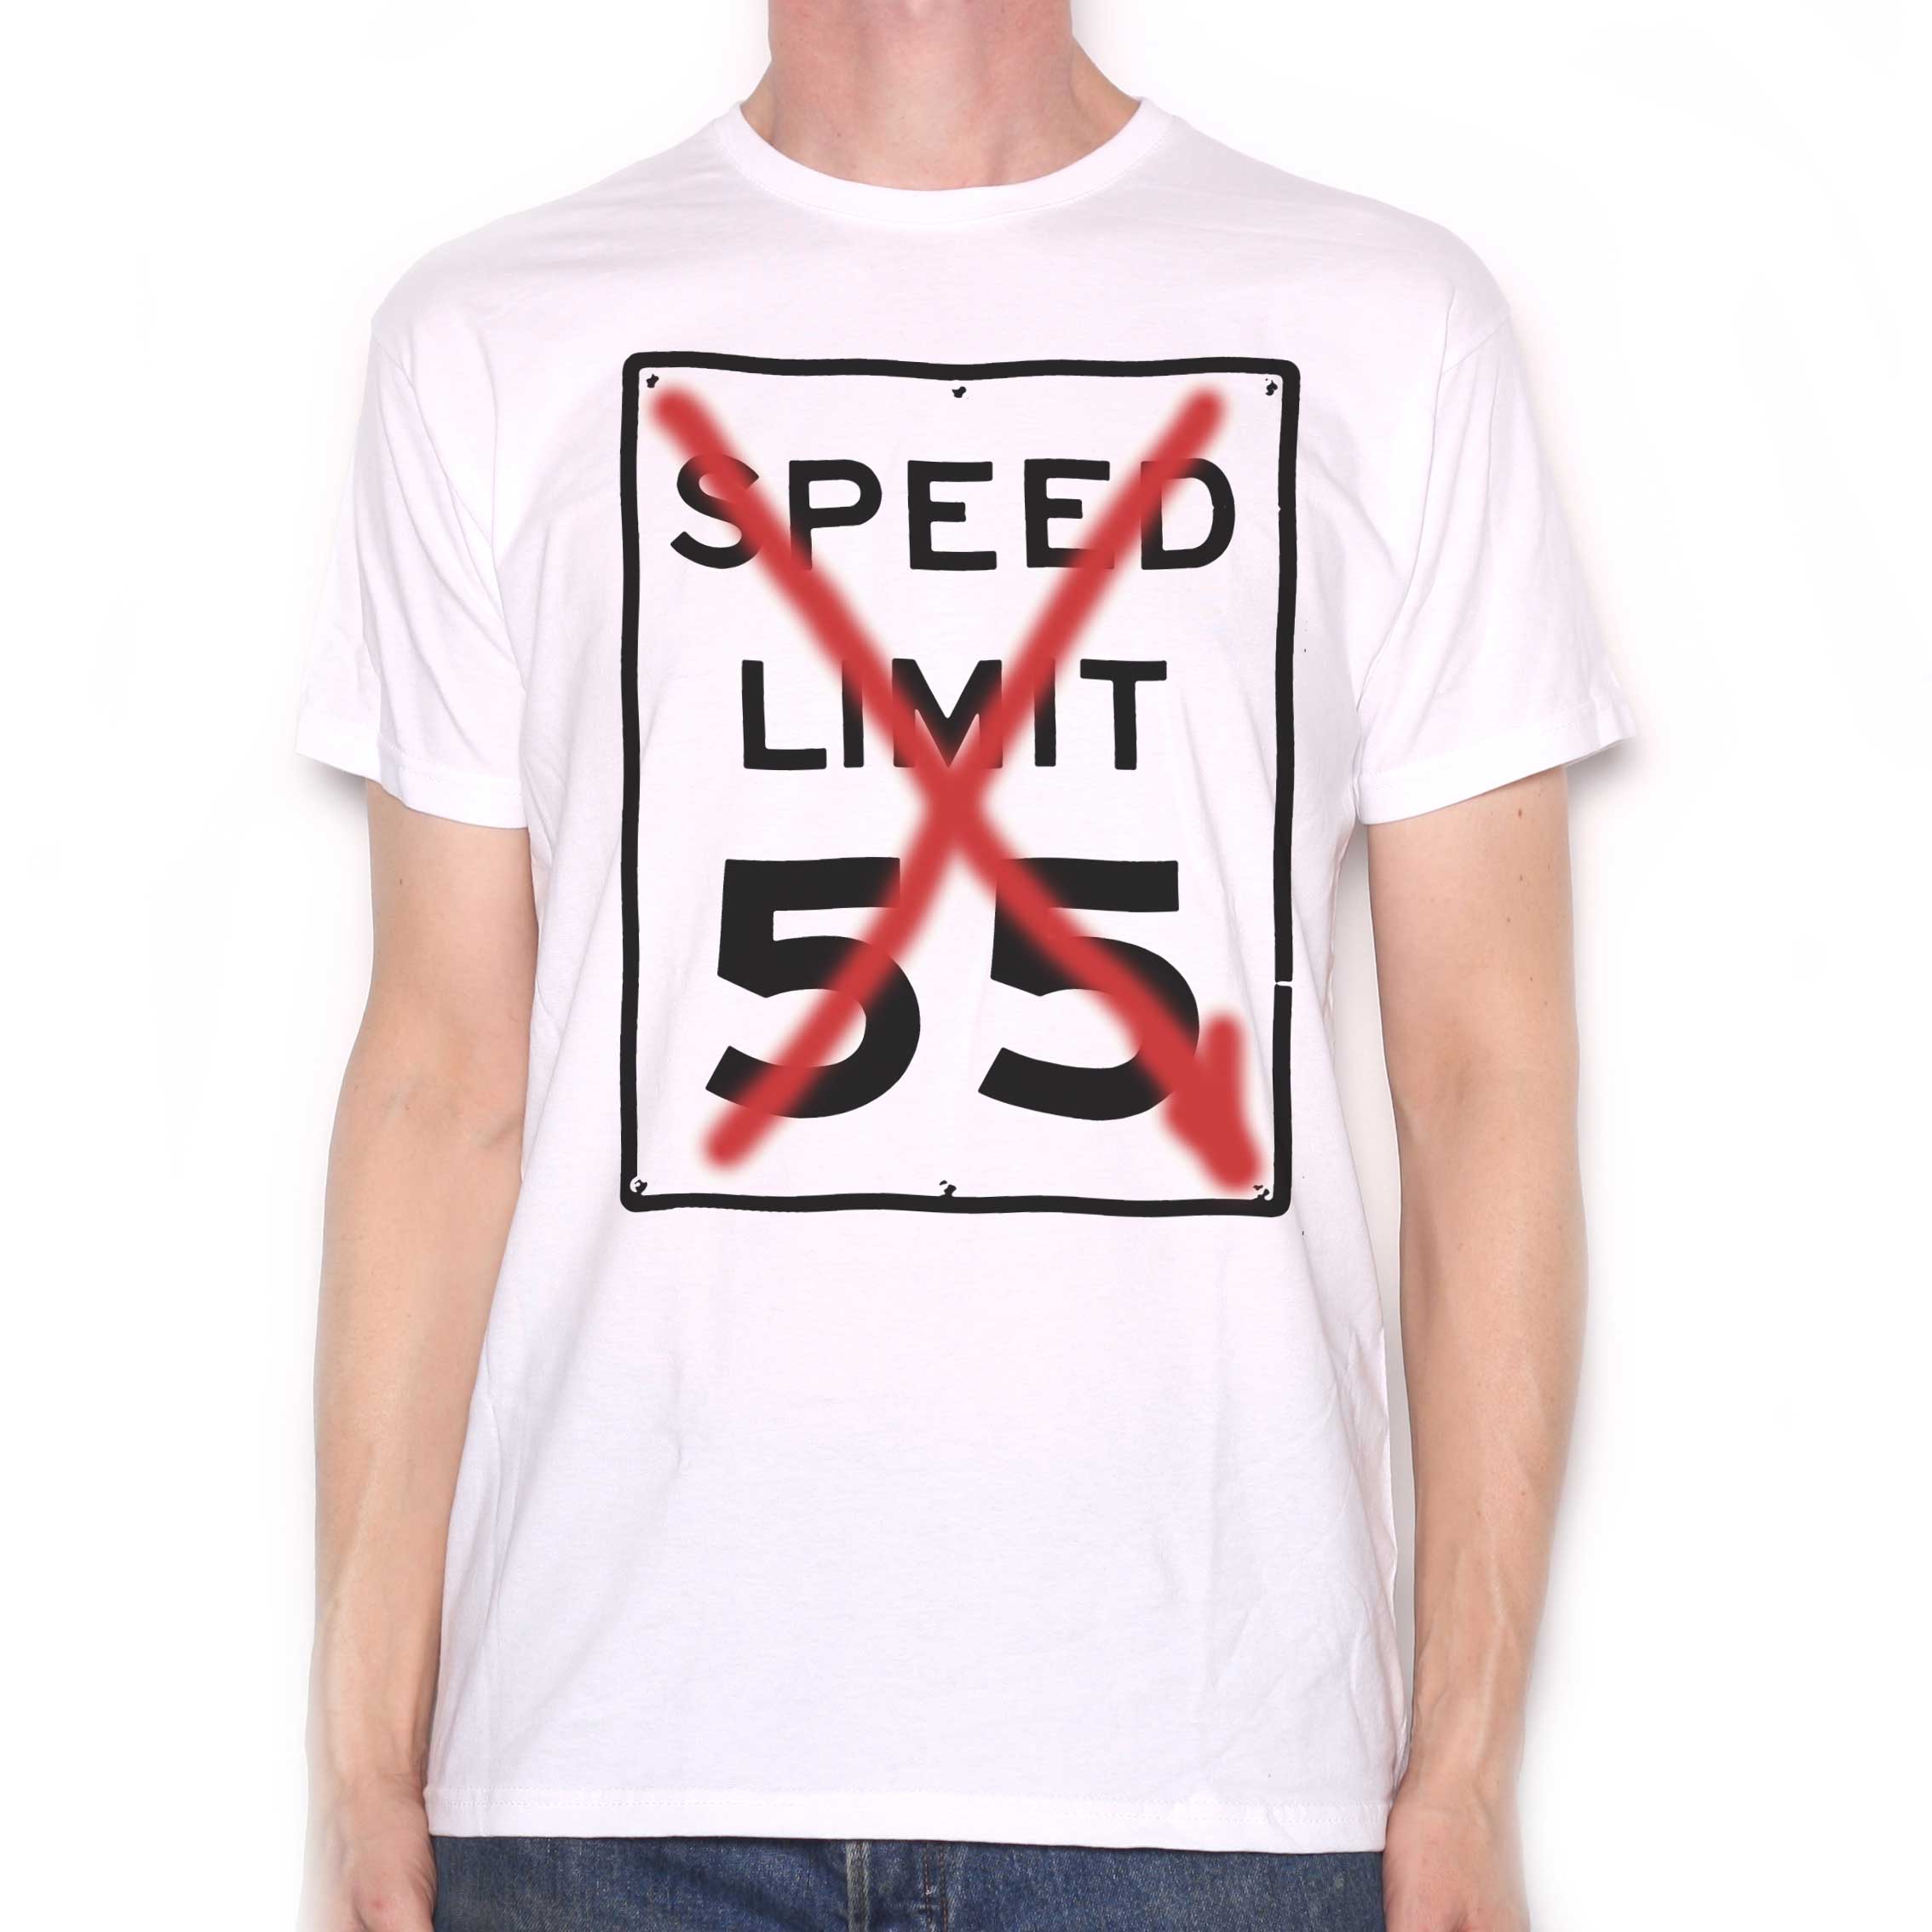 Inspired by The Cannonball Run T Shirt - 55 Spray Sign